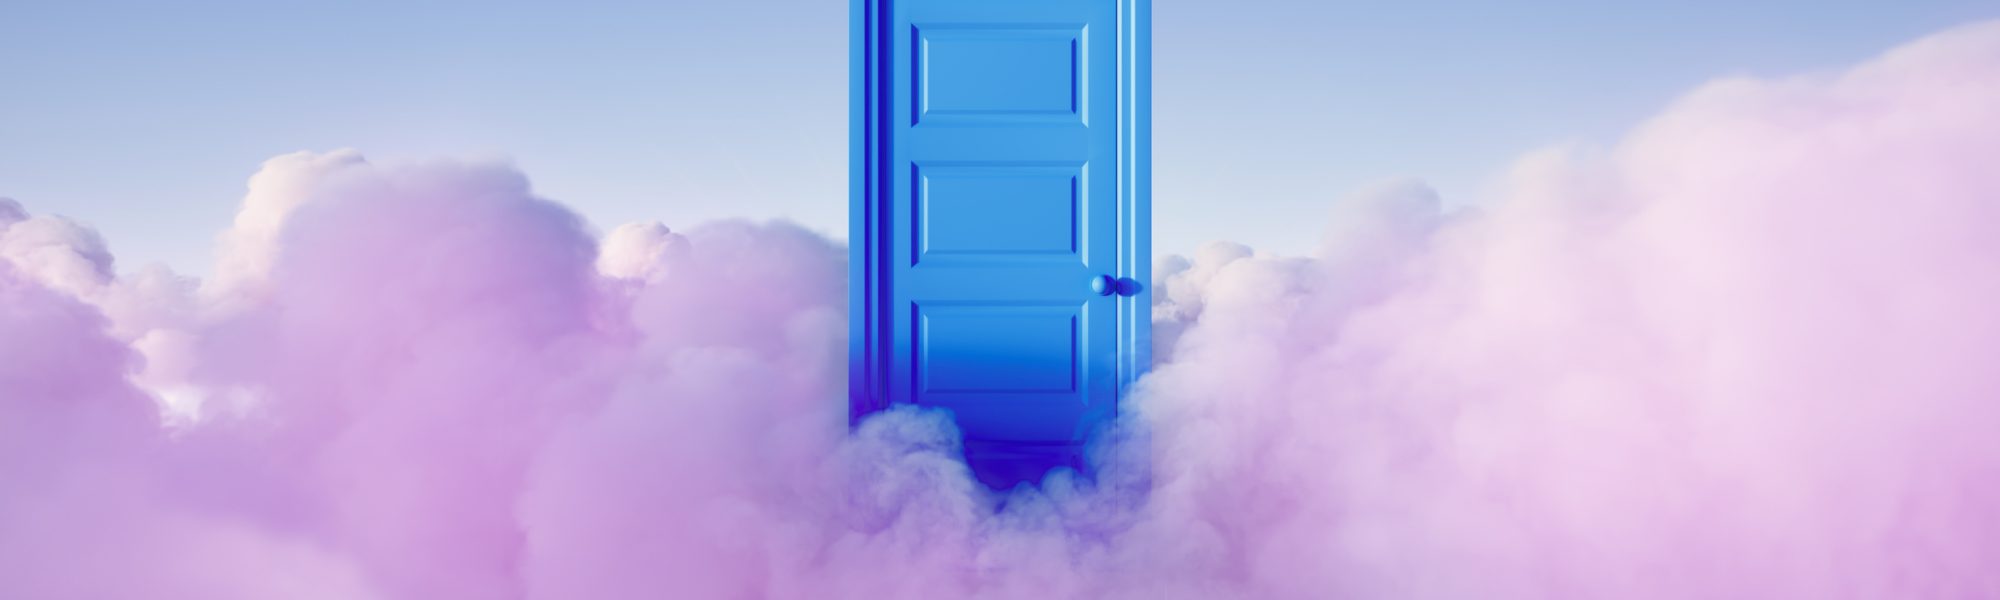 3d rendering, closed blue door and pink clouds in the sky. Abstract minimal background